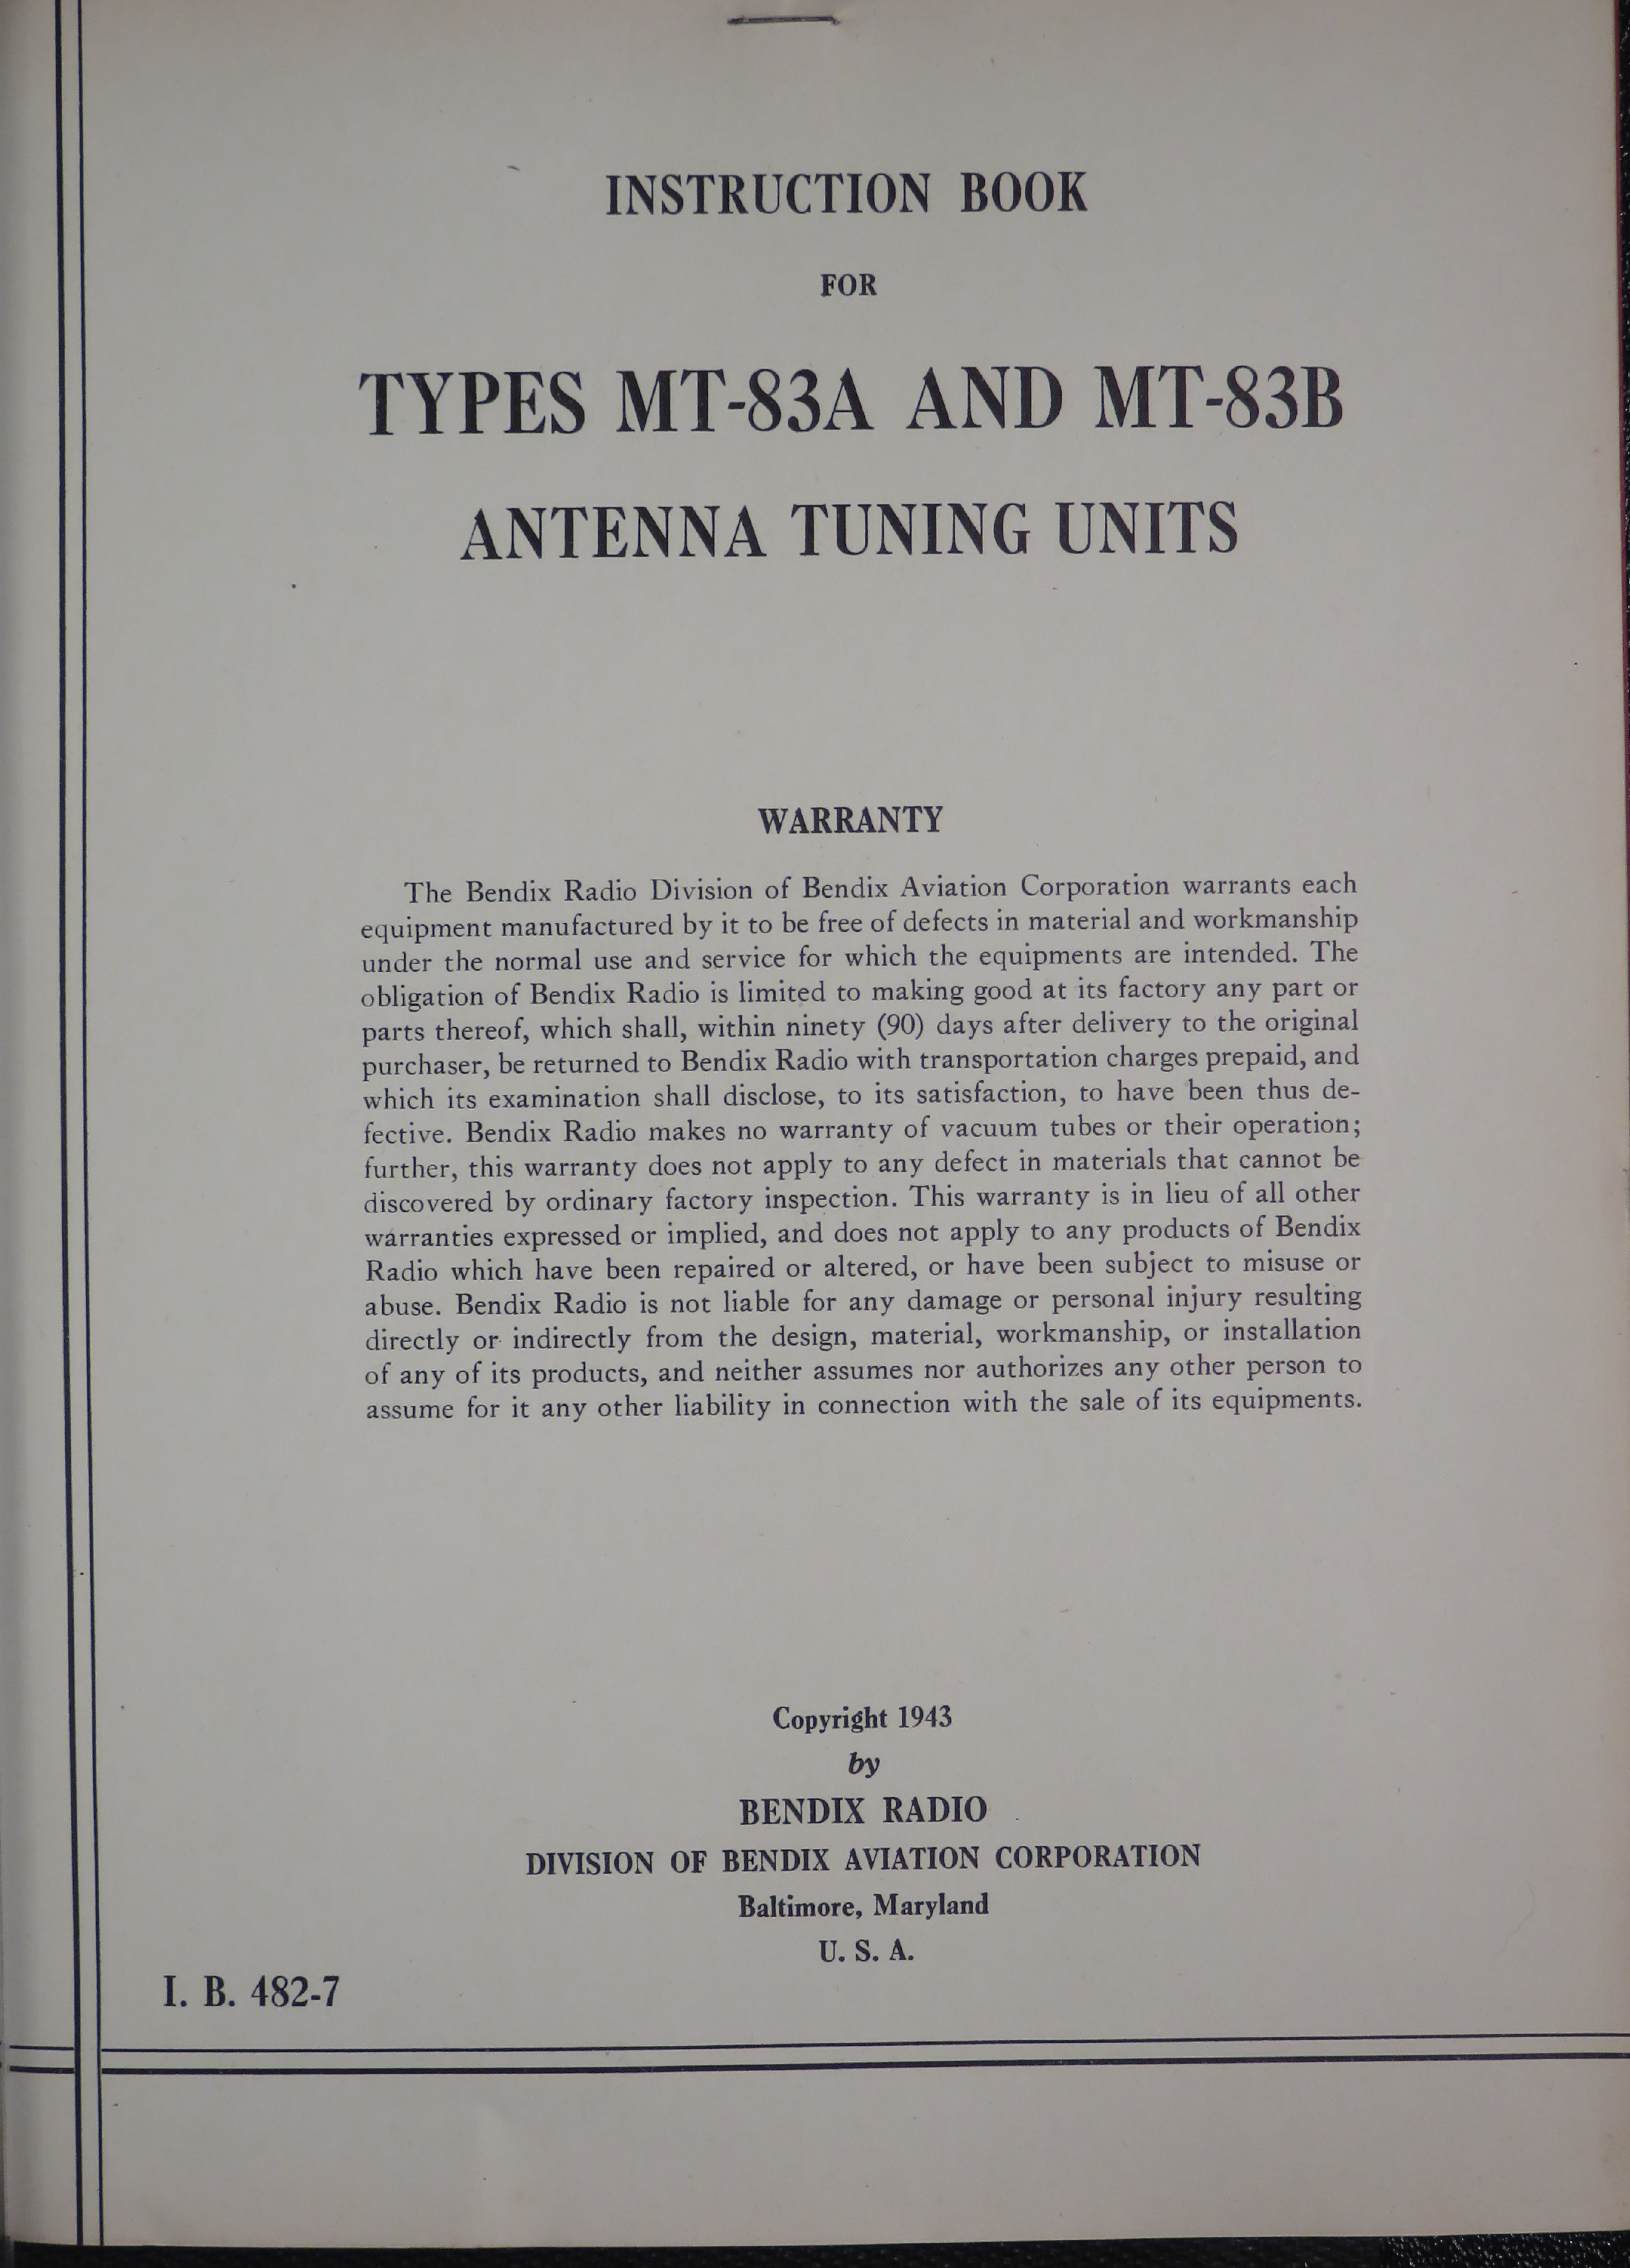 Sample page 5 from AirCorps Library document: Instruction Book for Types MT-83A and MT-83B Antenna Tuning Units